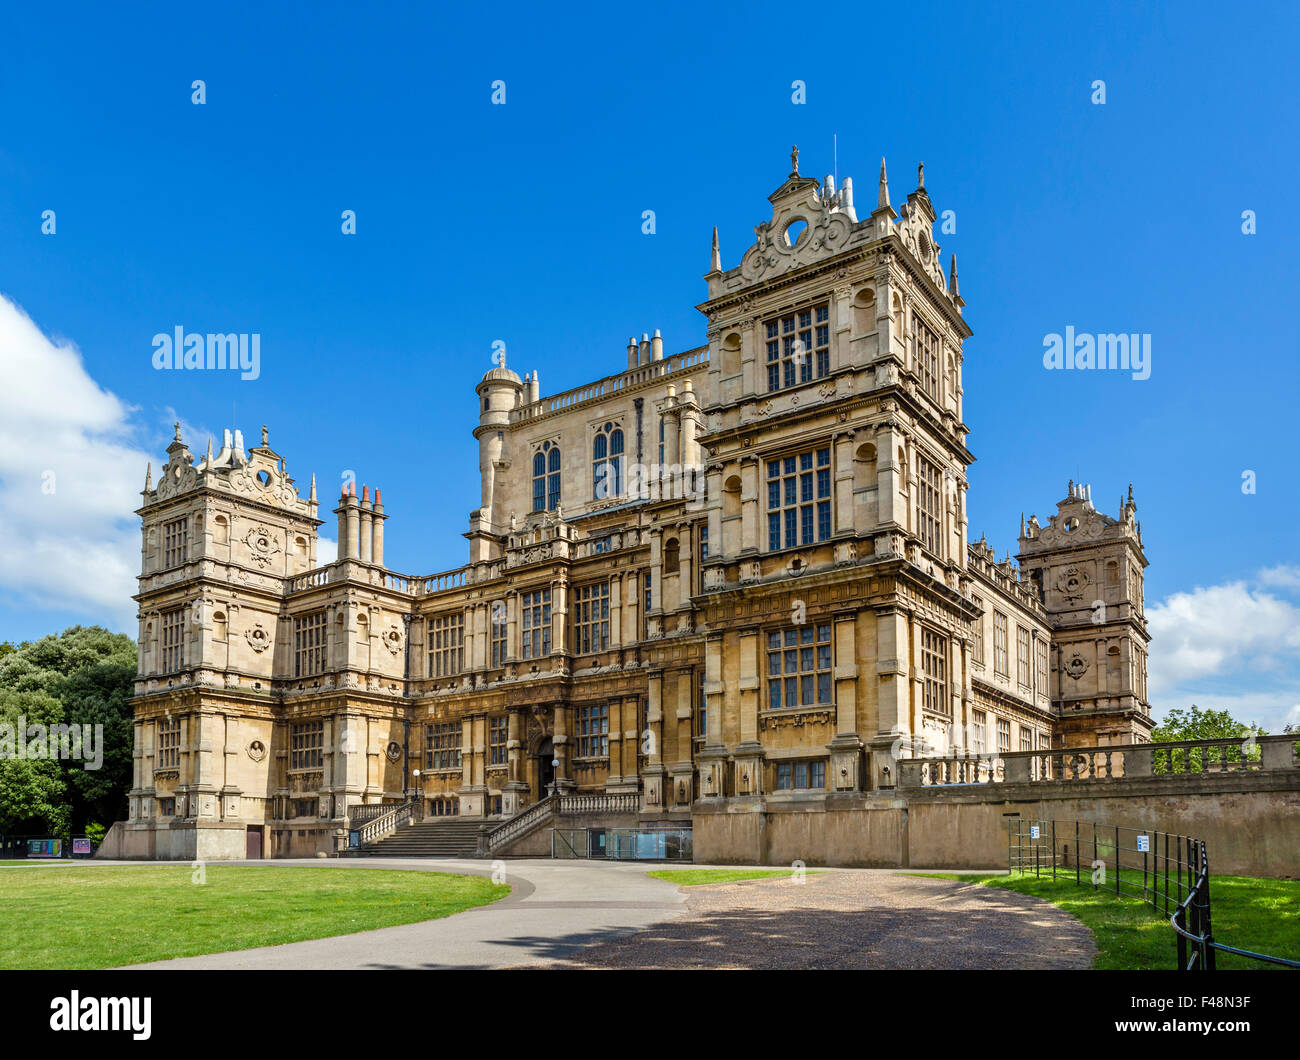 The front entrance of Wollaton Hall, a 16thC Elizabethan country house, Wollaton Park, Nottingham, England, UK Stock Photo